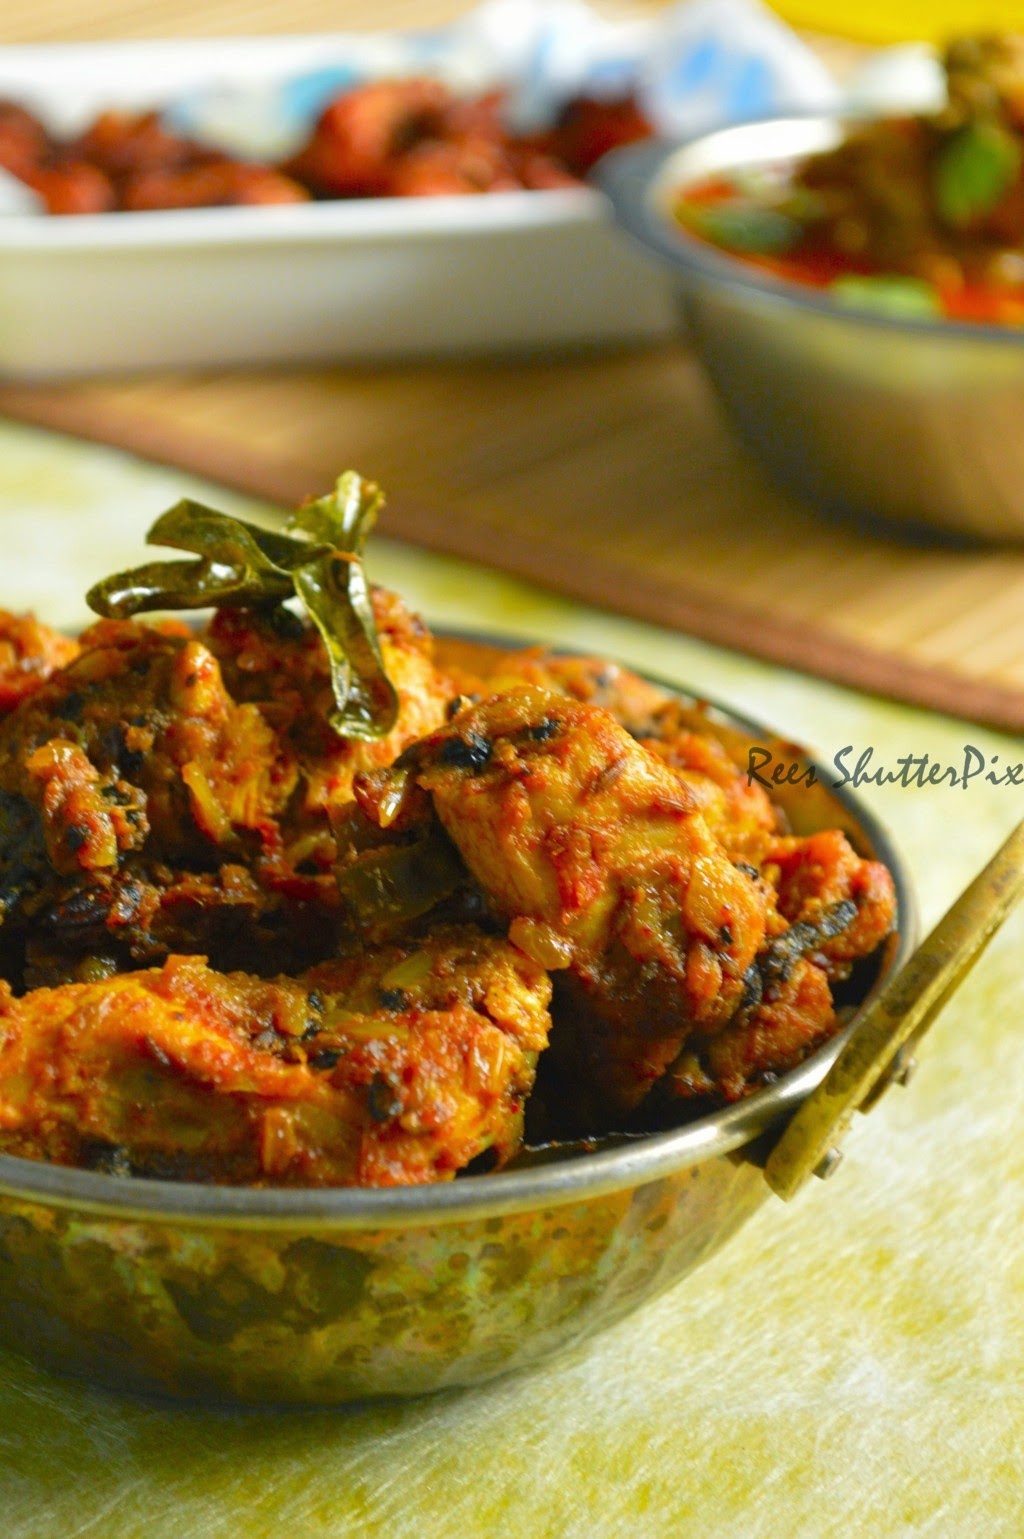 Chicken Starter Recipes, how to make pepper chicken chettinad with step by step pictures, chettinad pepper chicken recipe, easy chicken recipes, spicy chettinad chicken